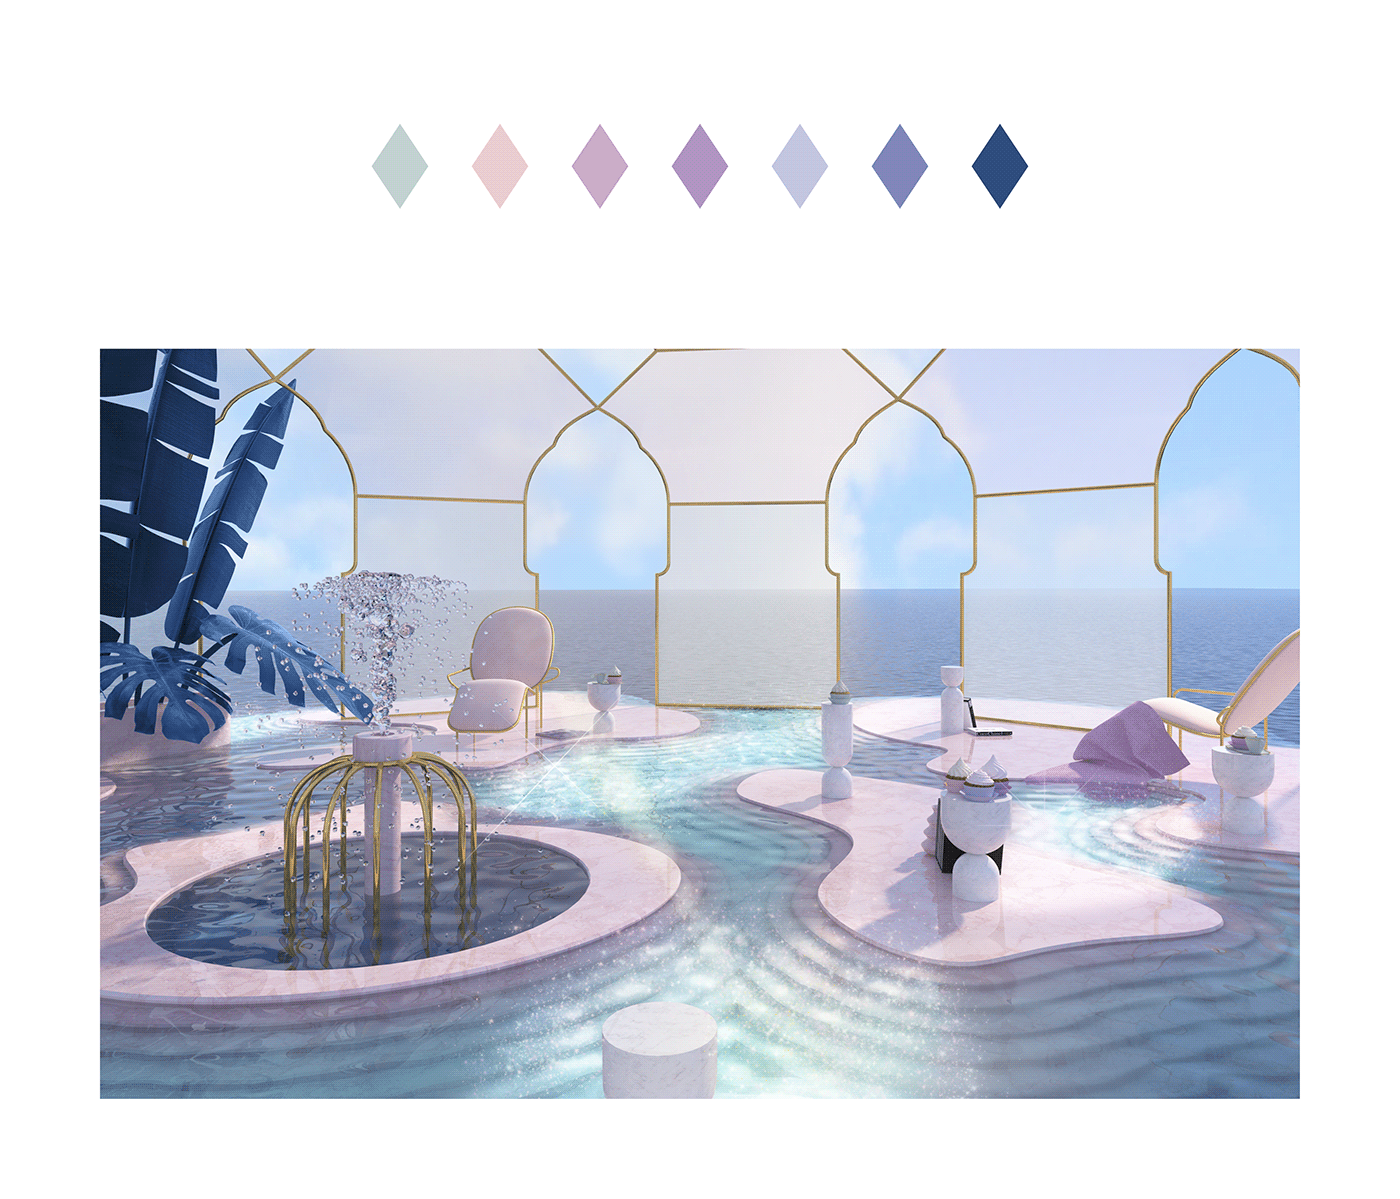 3DDesign architecture archs ethereal interiordesign pastel Render sunroom surreal vray